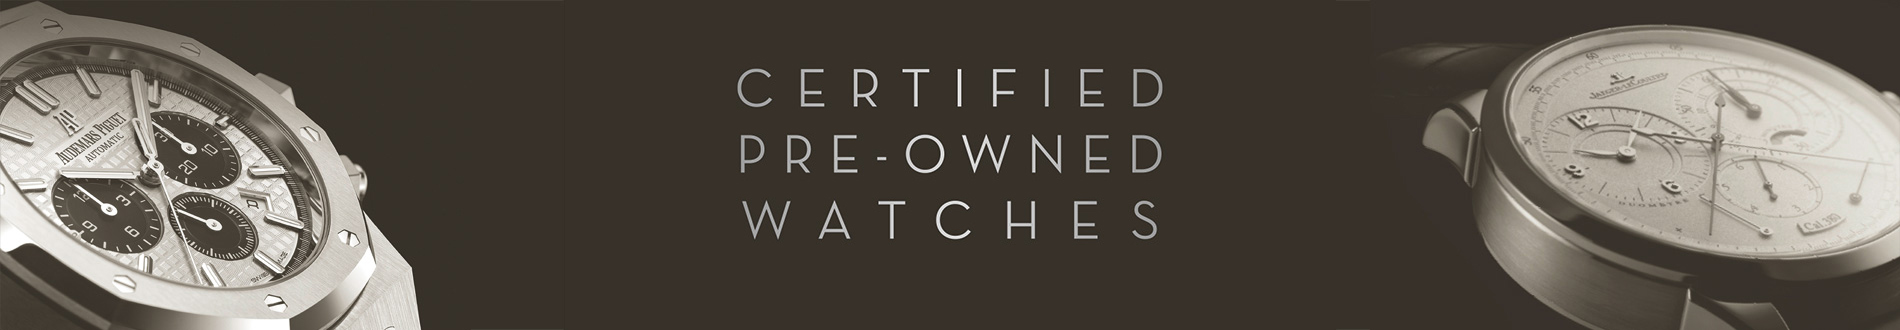 Certified Pre-Owned Watches 